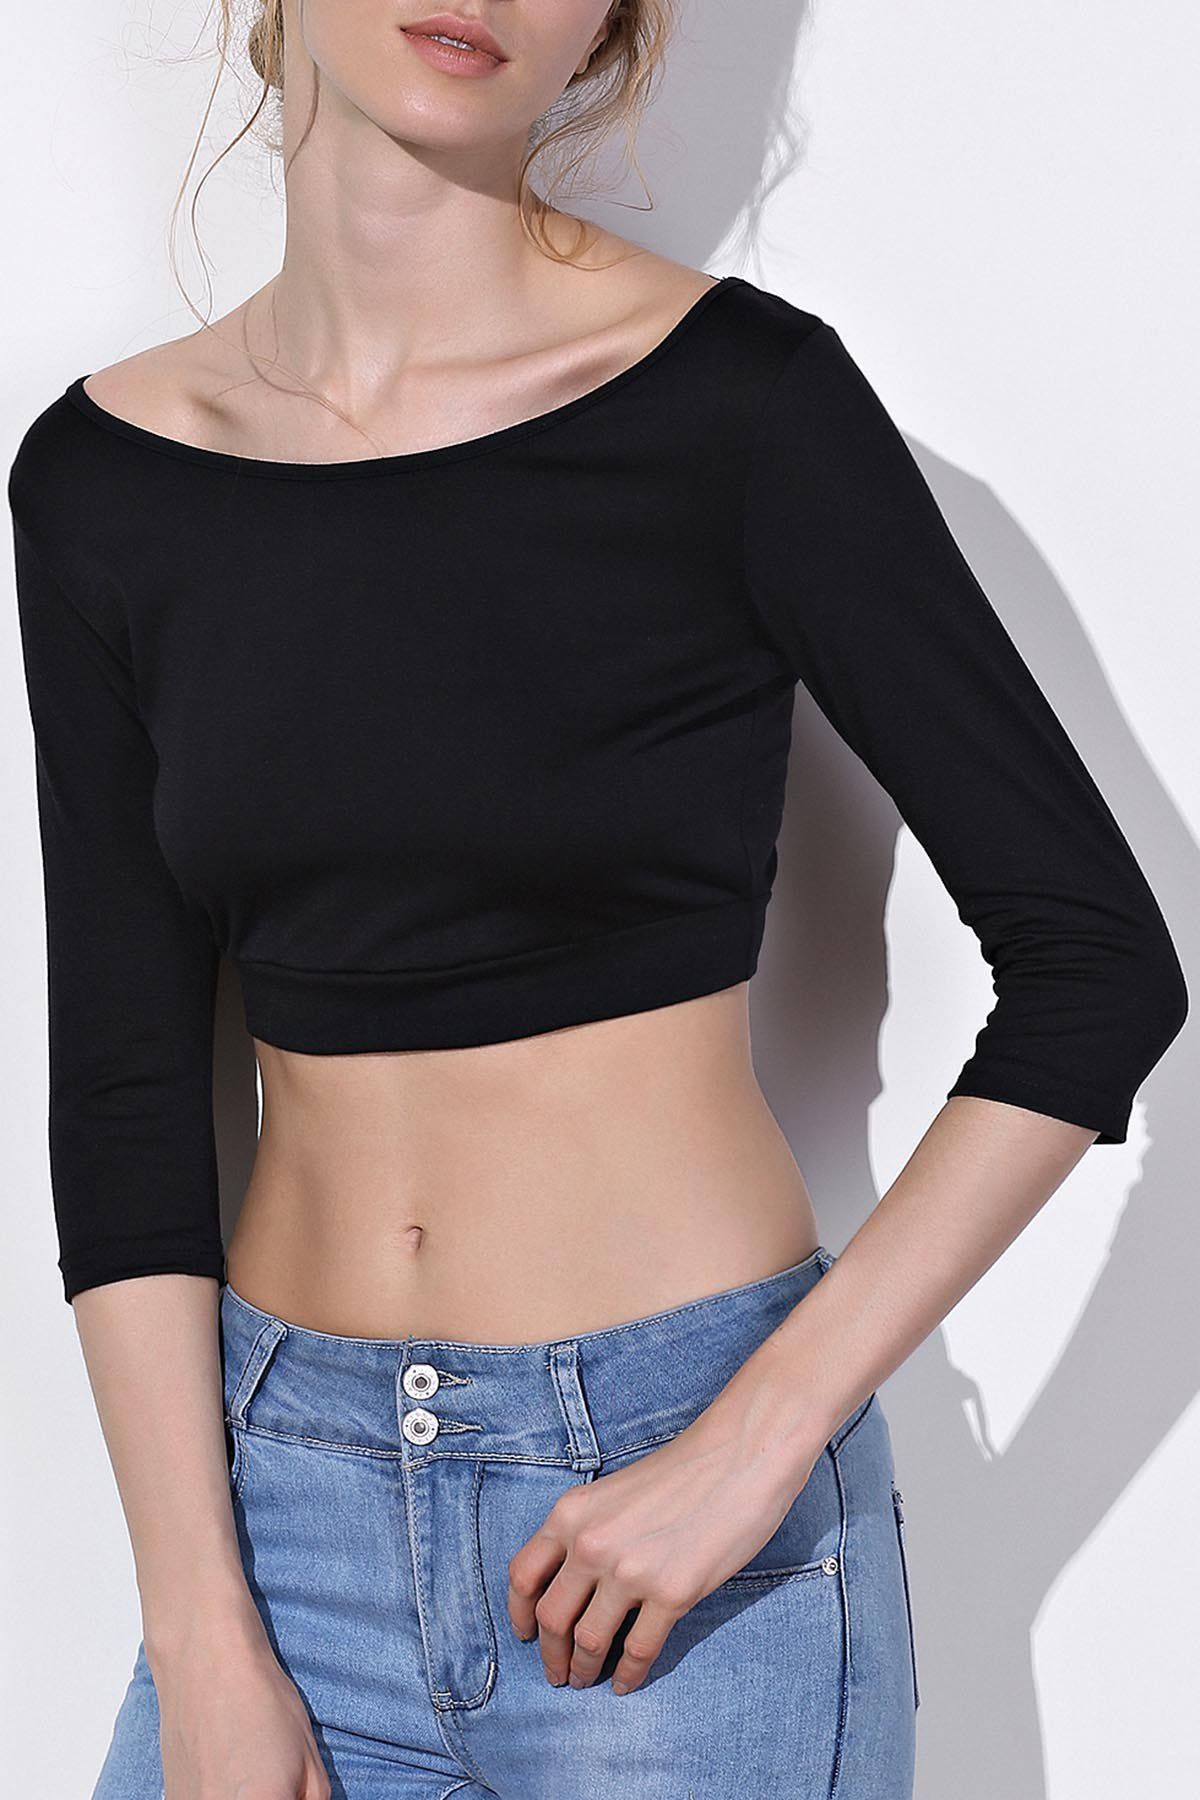 Sexy Black Scoop Neck 3/4 Sleeve Bodycon Short T-Shirt For Women